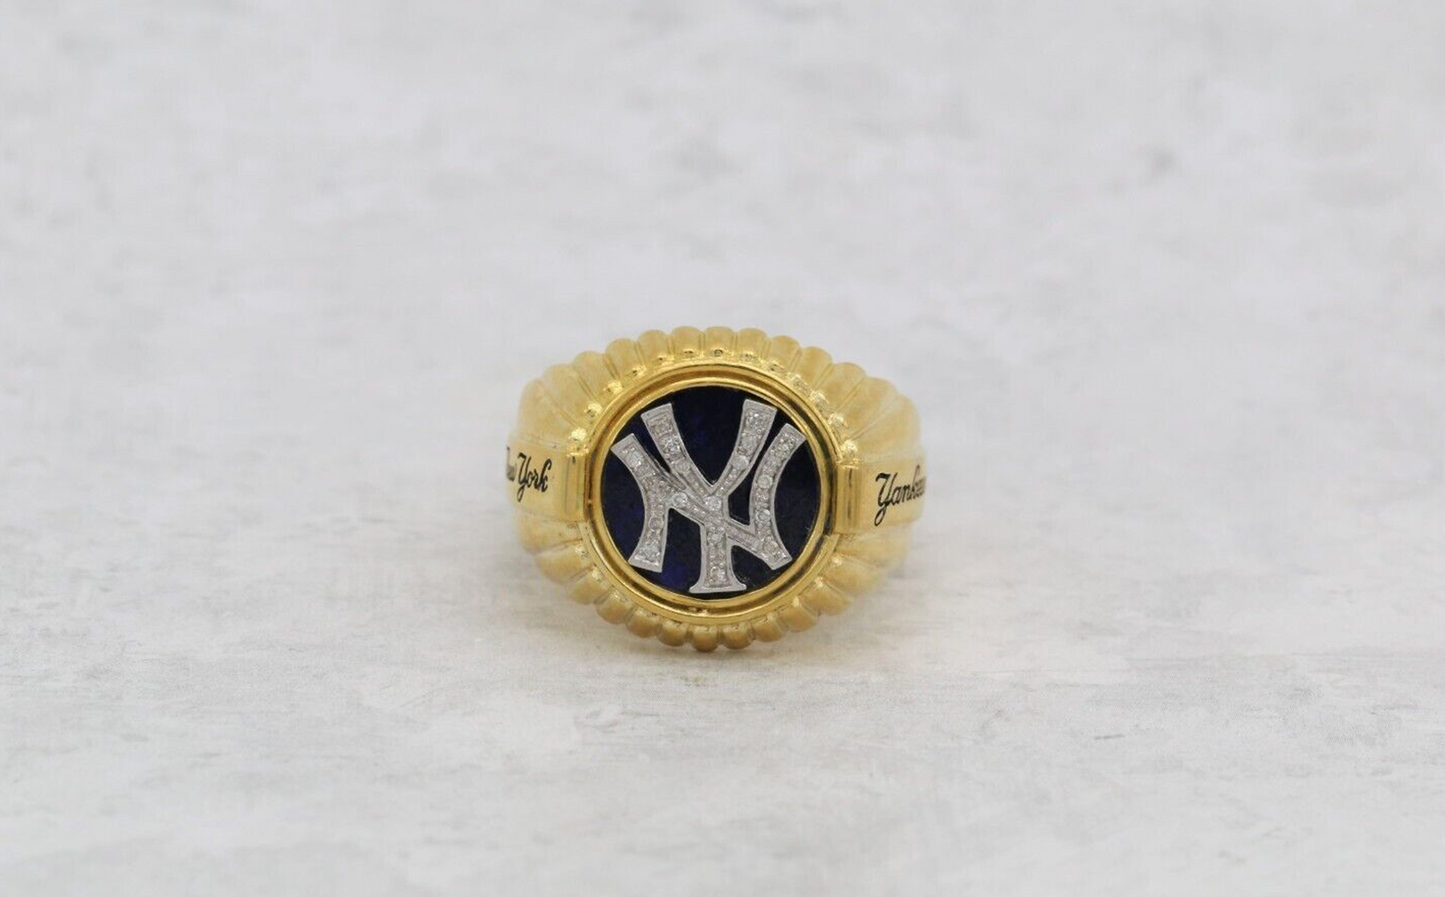 New York Yankees Sterling Silver Men's Ring, Size 13 - 13.2g